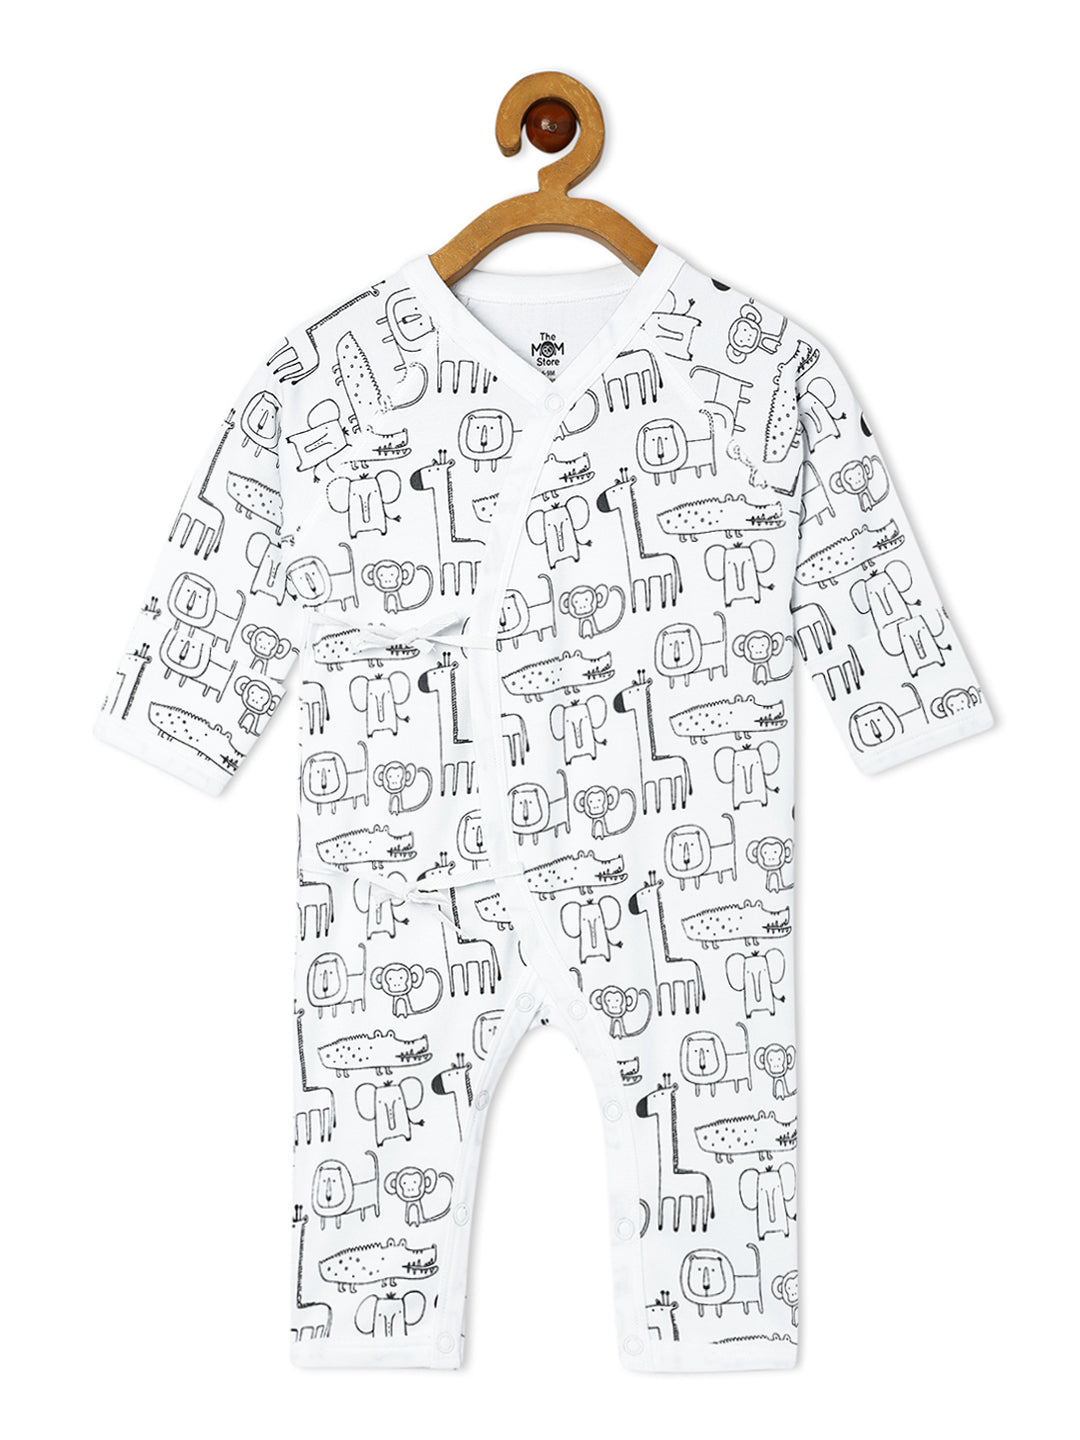 Jabla Style Infant Romper Combo of 2-The Jungle Book-Lion King